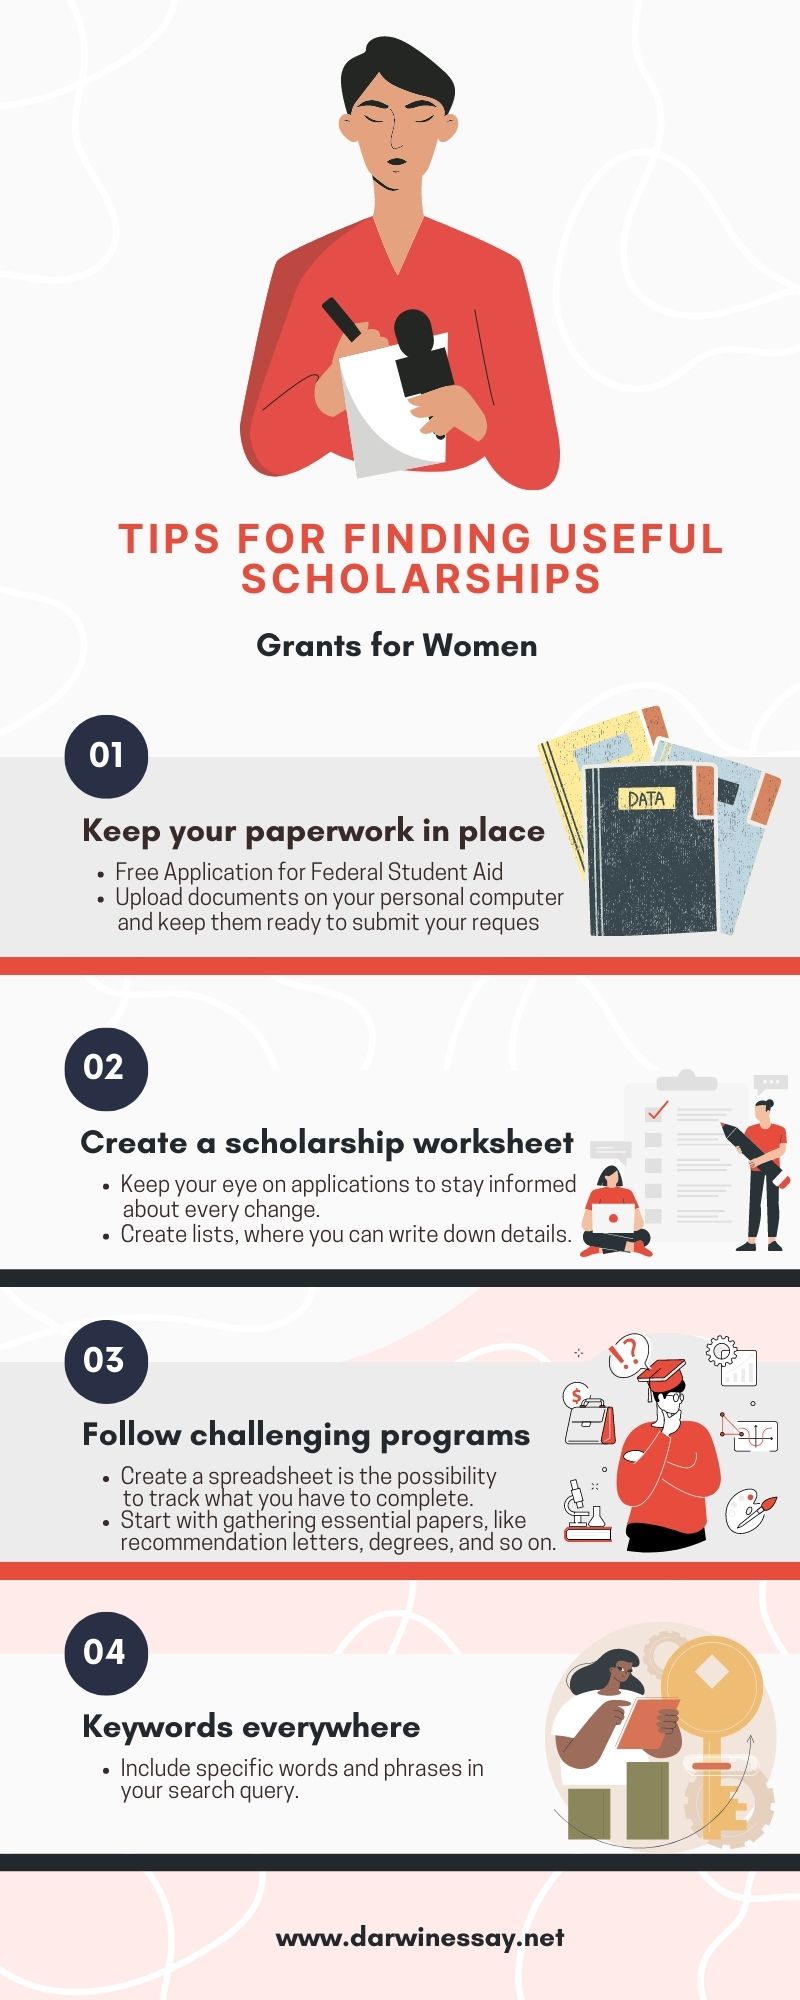 Tips for finding useful Scholarships and Grants for Women